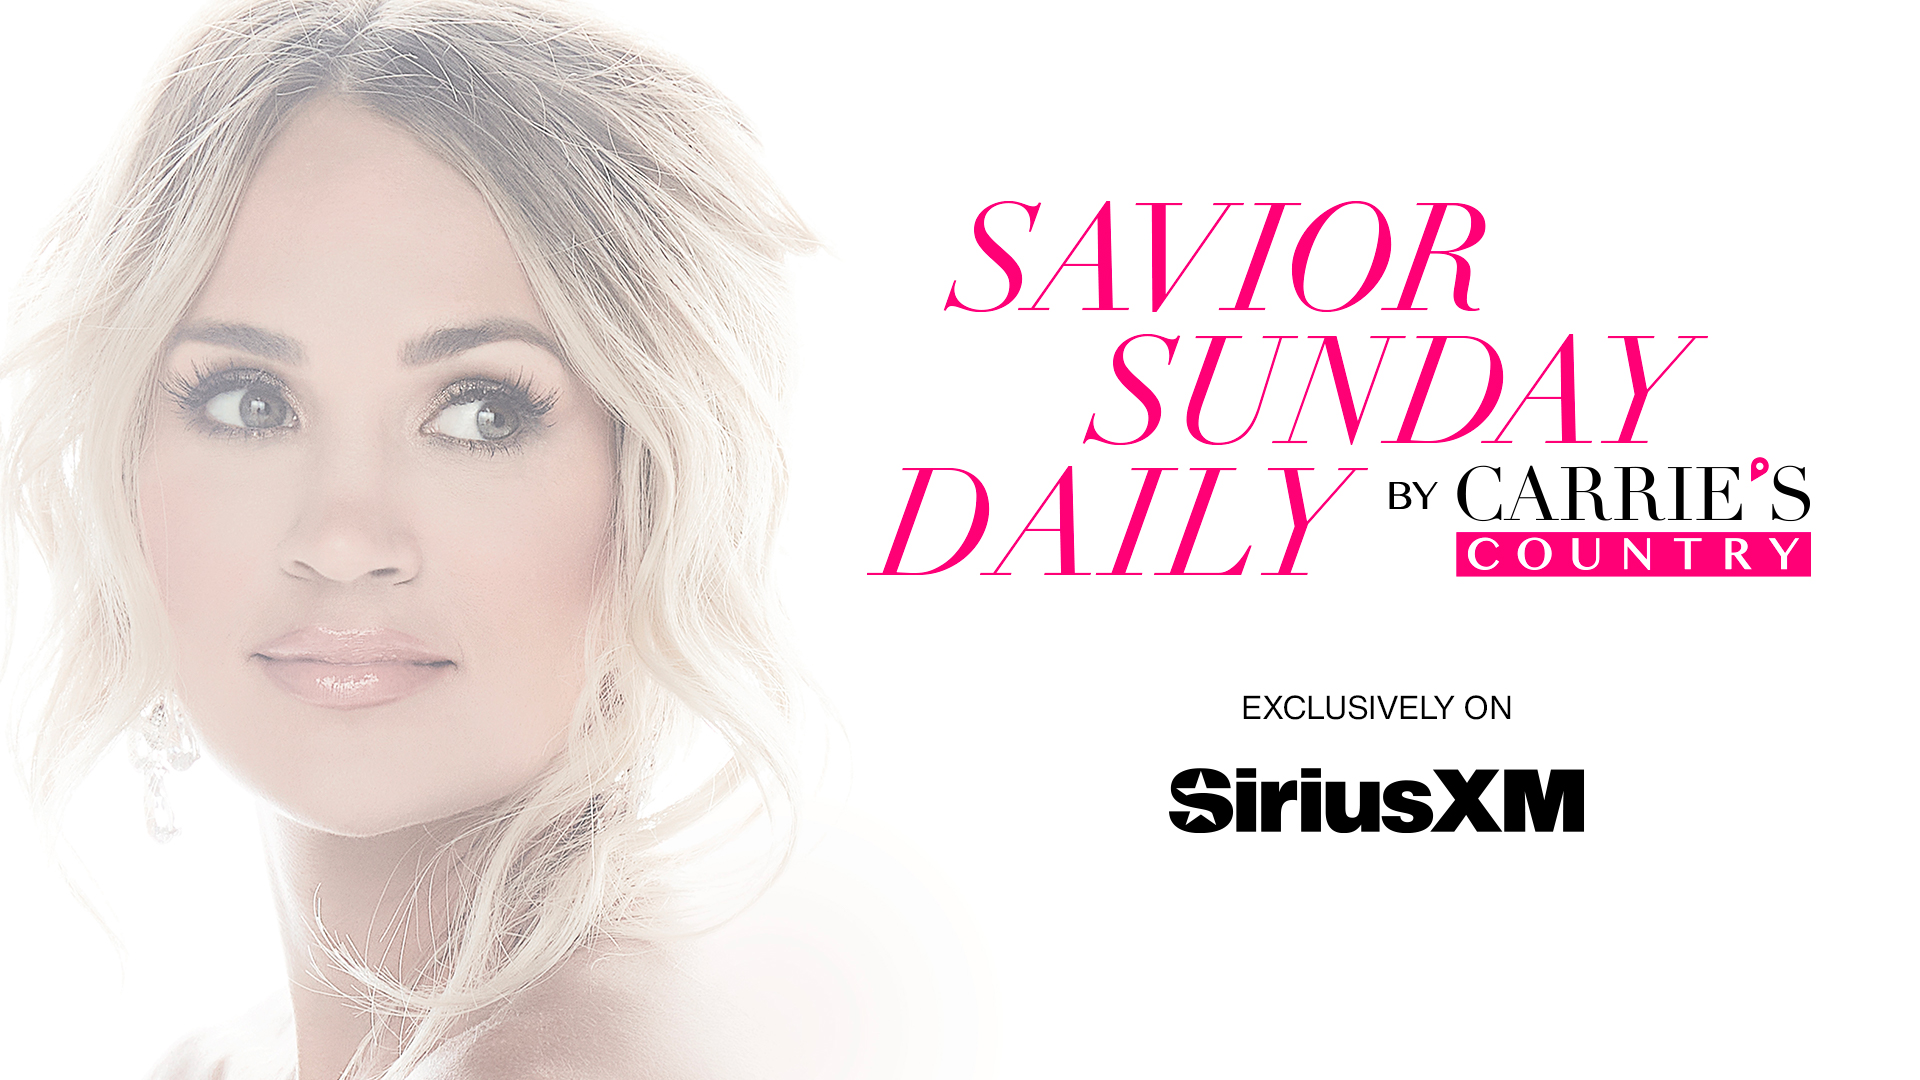 Savior Sunday Daily by CARRIE'S COUNTRY exclusively on SiriusXM